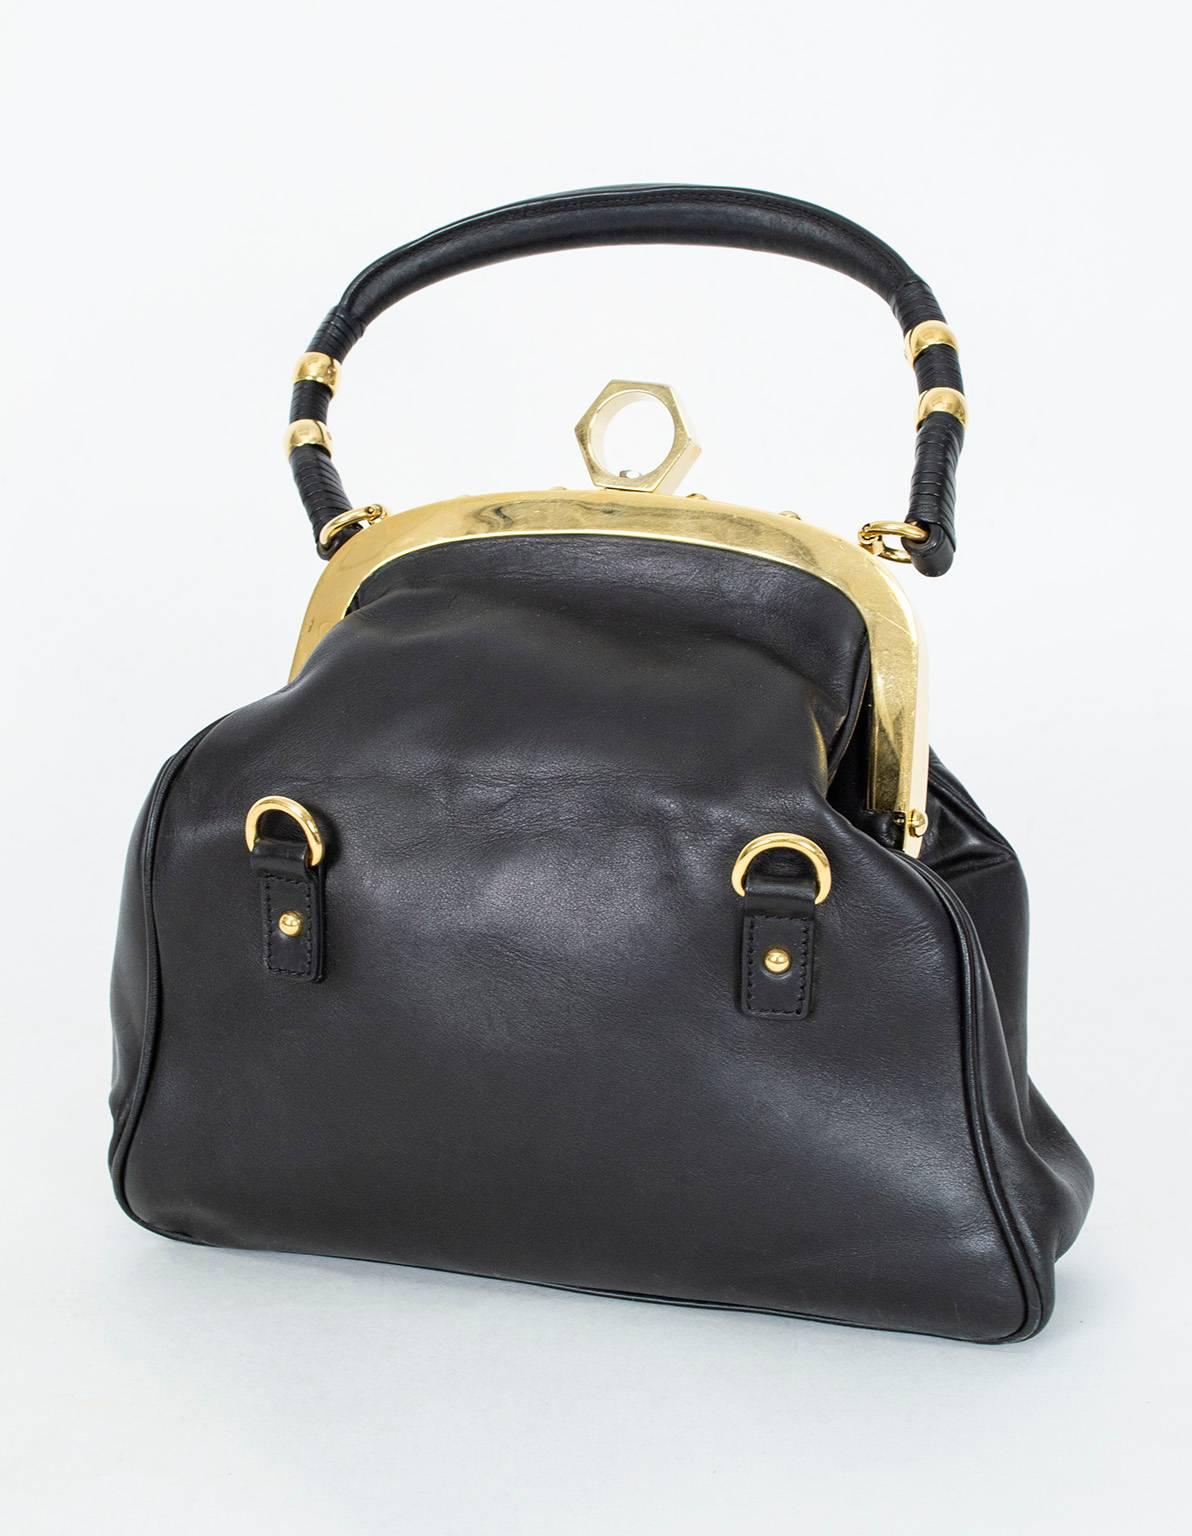 One of Zac Posen's early handbag designs, the Alexia frame bag instantly became a hallmark of Posen's catalogue thanks to its spacious interior, ever-so-slightly Bohemian silhouette and long top handle, which permitted it to be carried over the